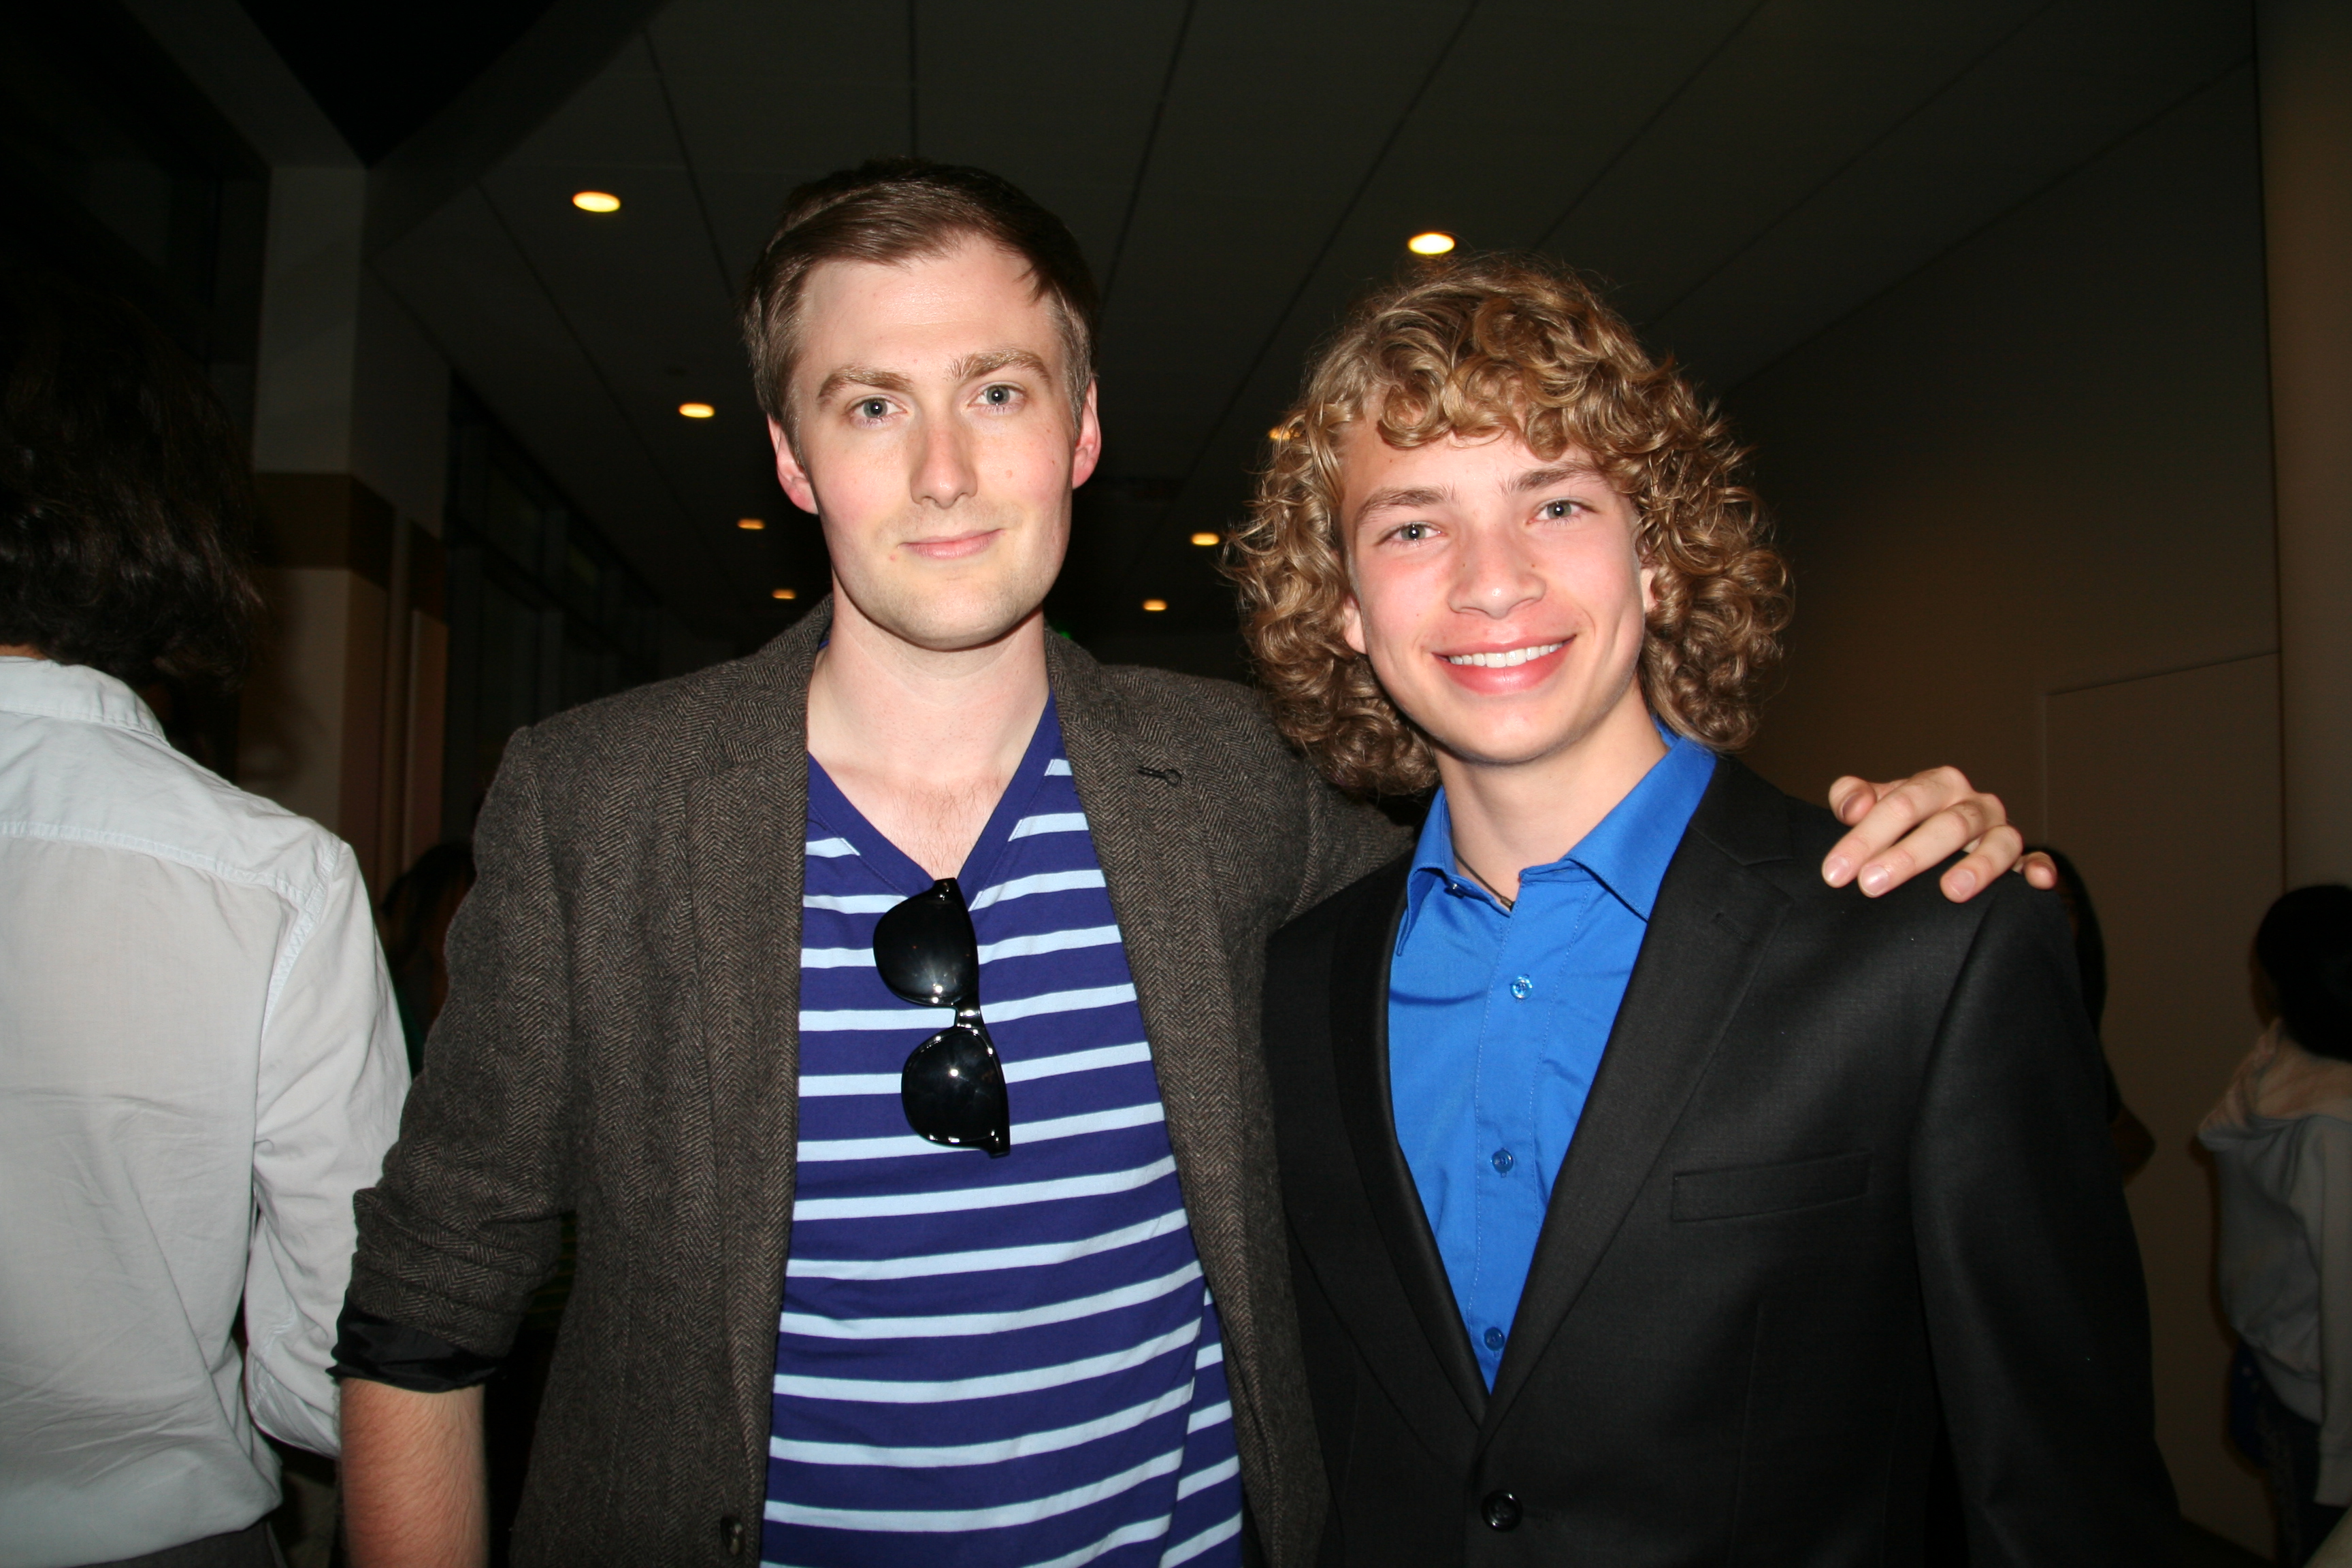 Will Meyers and Producer Ross Putman at the LAFF Premiere of The Young Kieslowski (June 17, 2014)